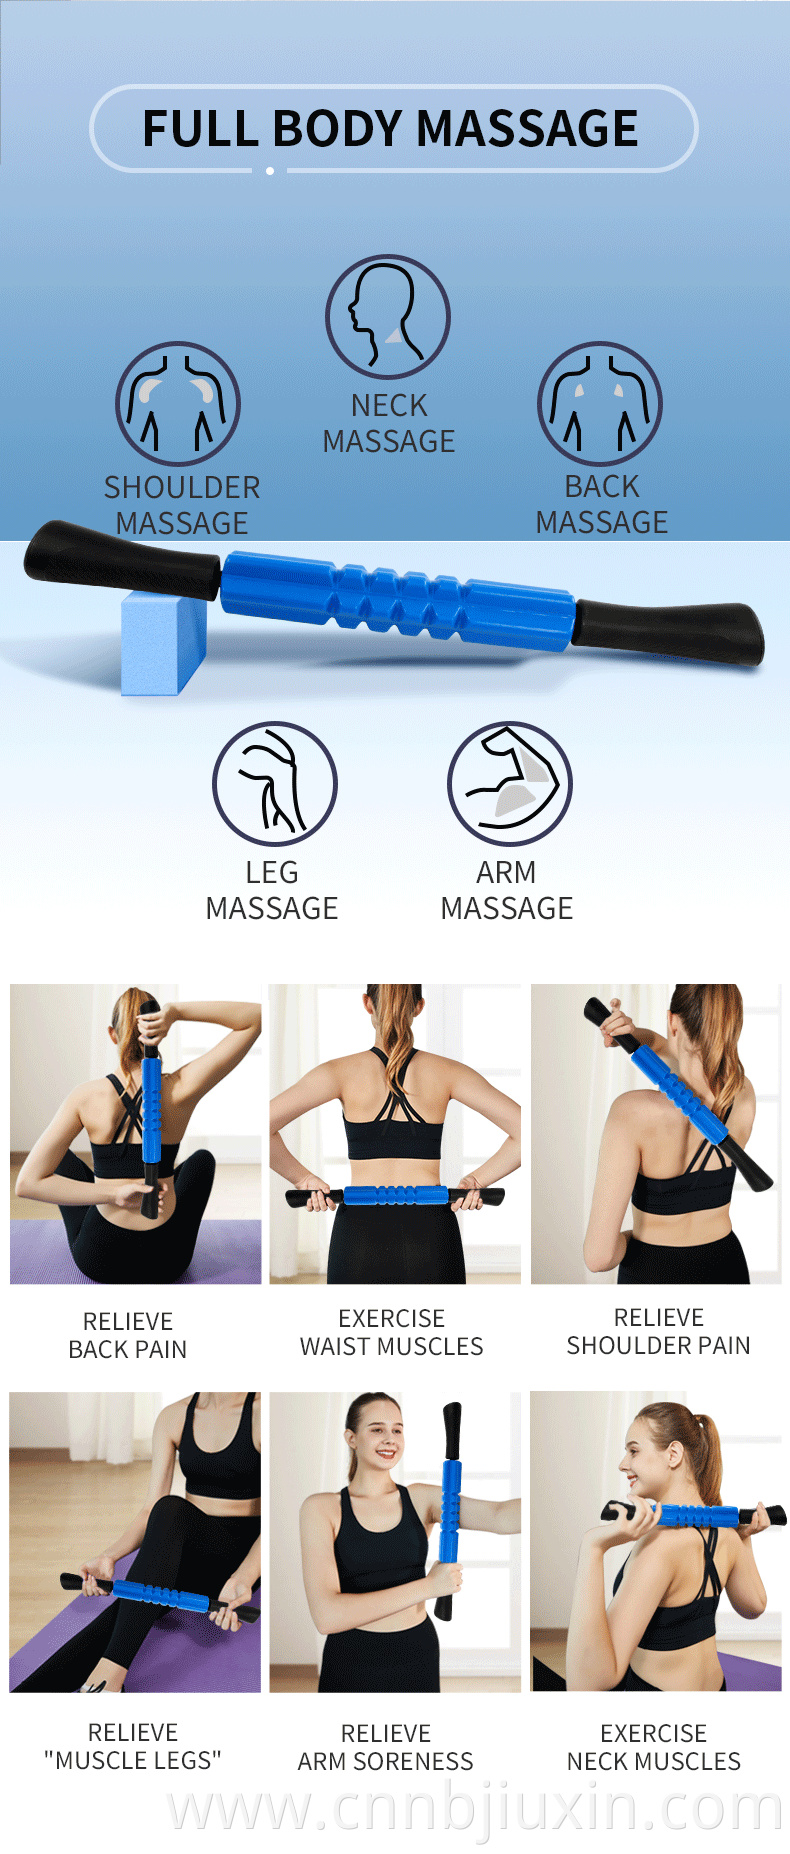 fascia stretching chest open shoulder beauty back yoga massage stretching fitness Pilates ring